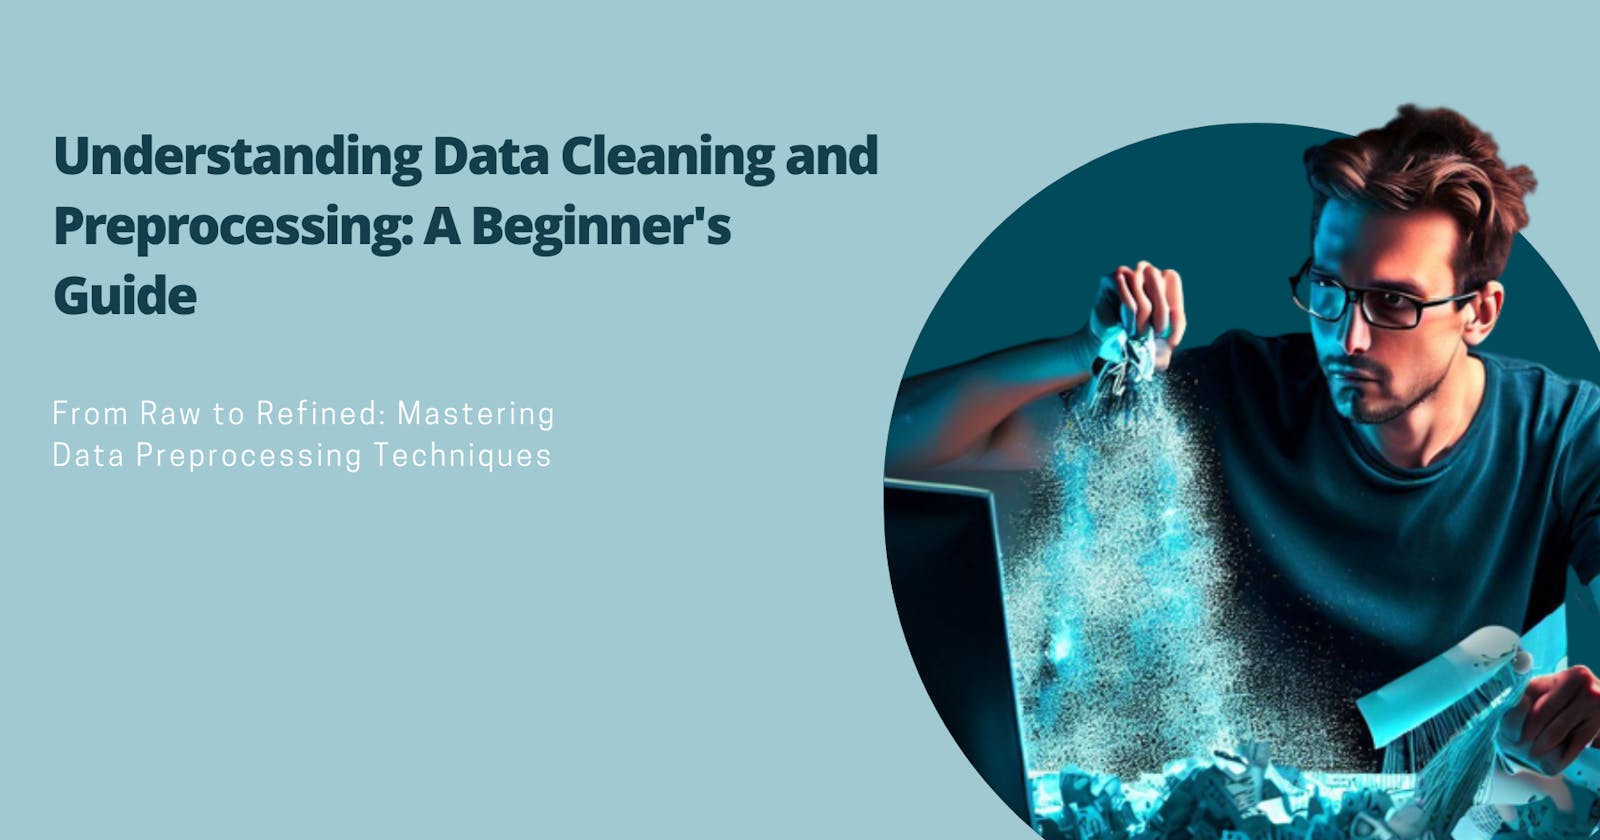 Understanding Data Cleaning and Preprocessing: A Beginner's Guide